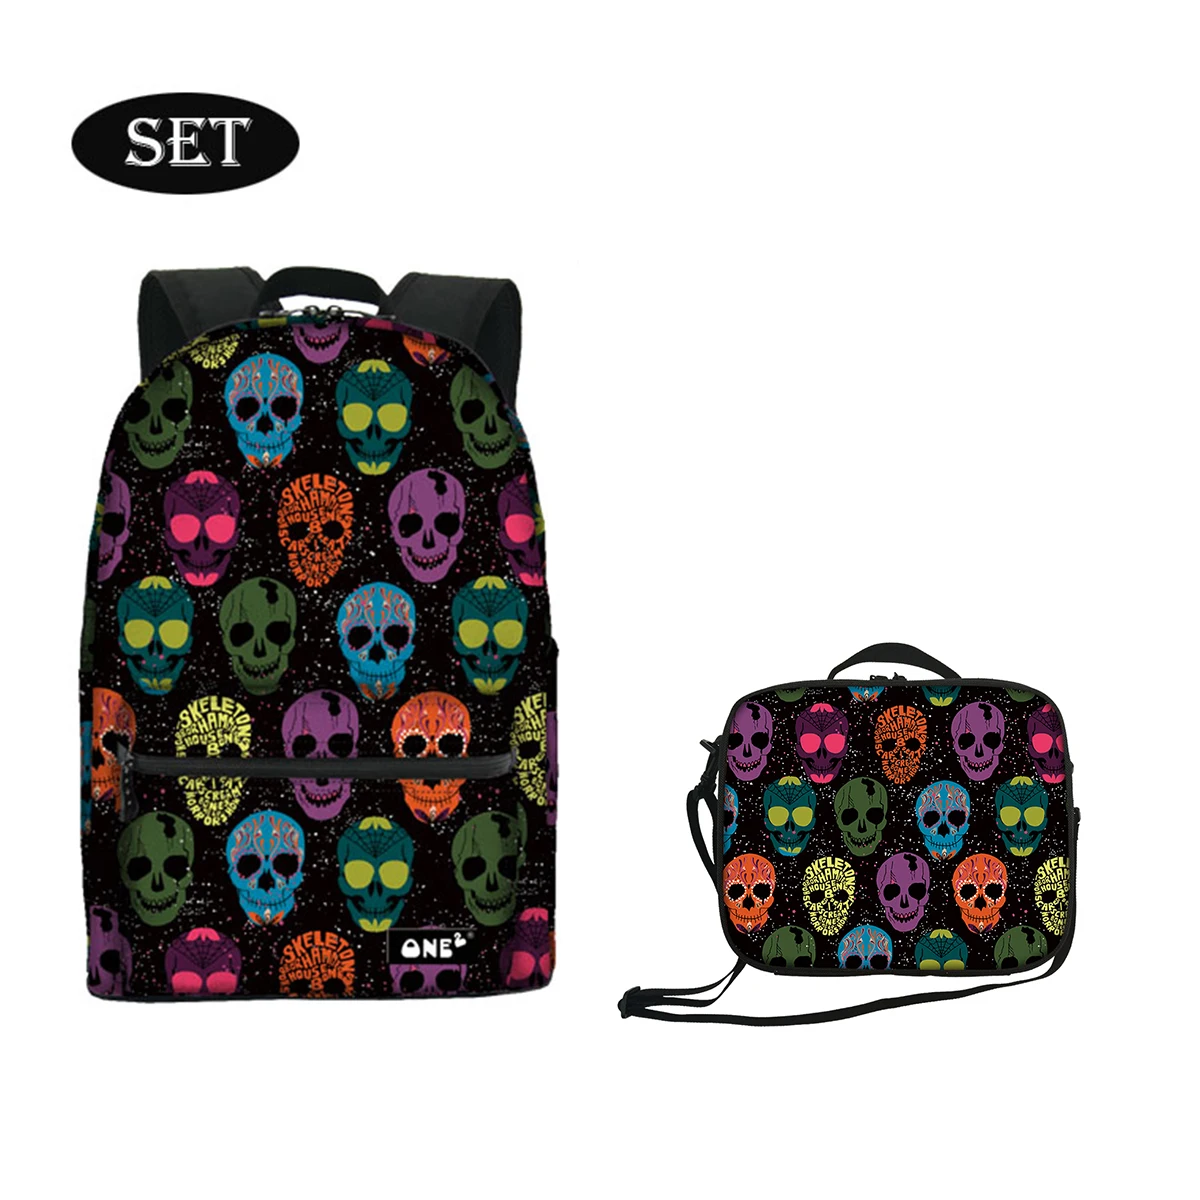 

Skull print lunch box insulation bag+sac a dos d enfant 2020 new arrivals fashionable lightweight waterproof bag for kids, Customized